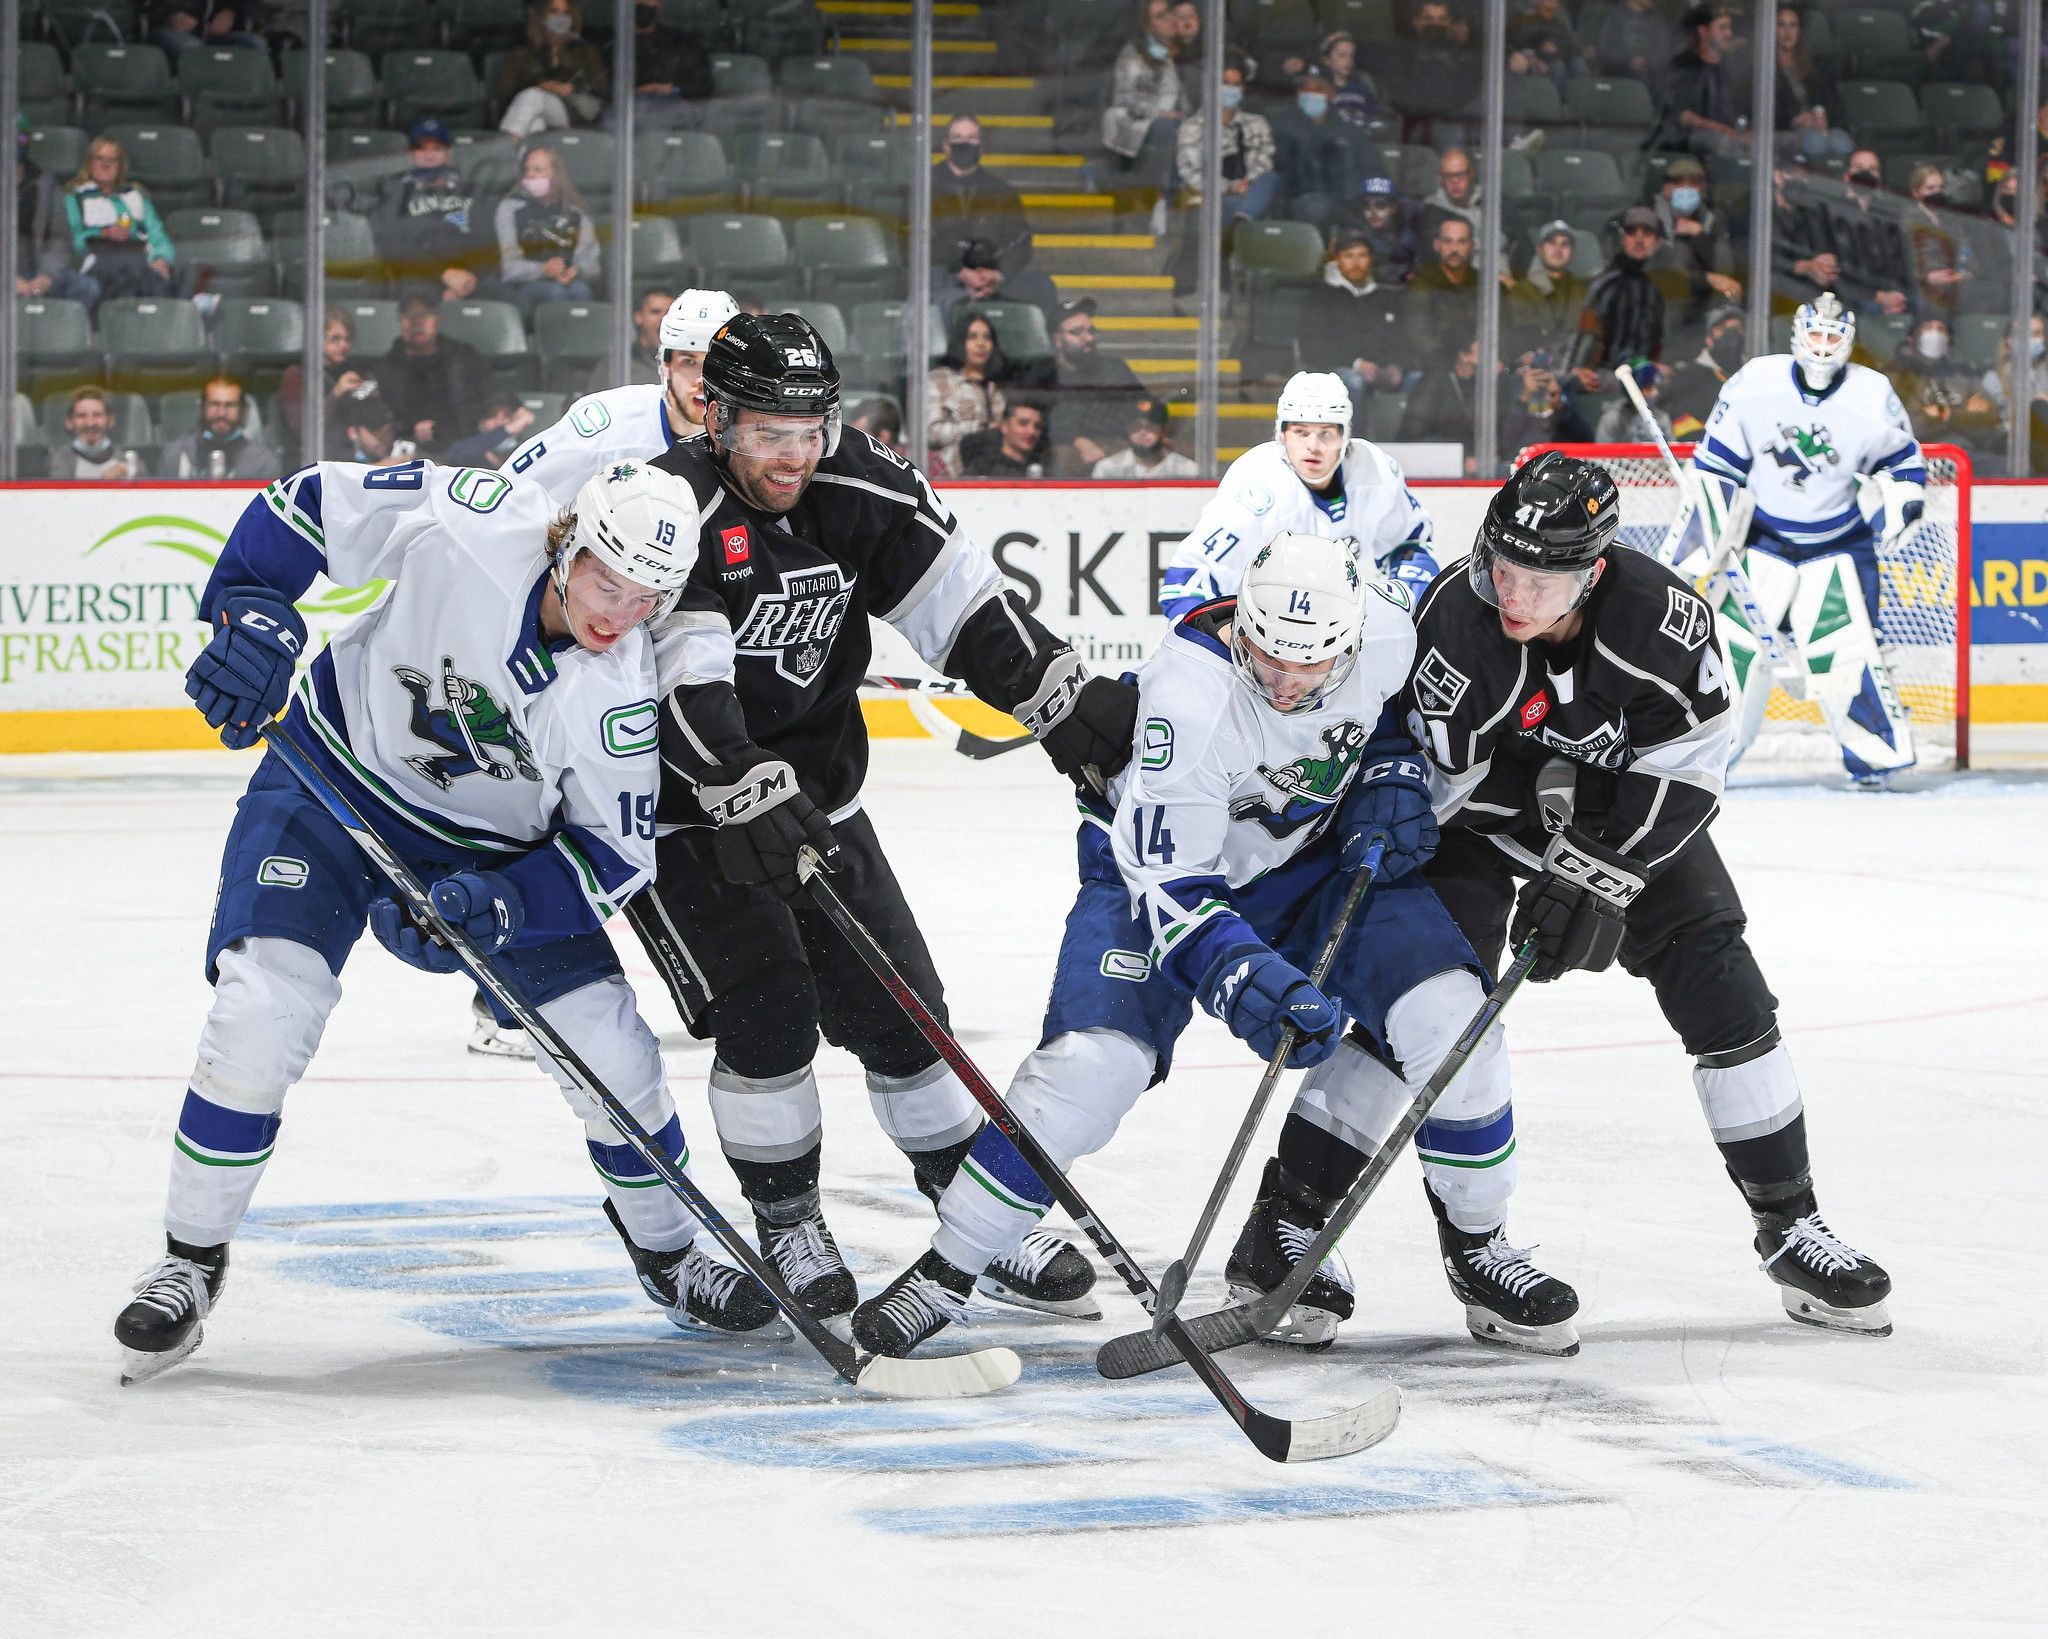 Canucks players and Reign players battling for possession.